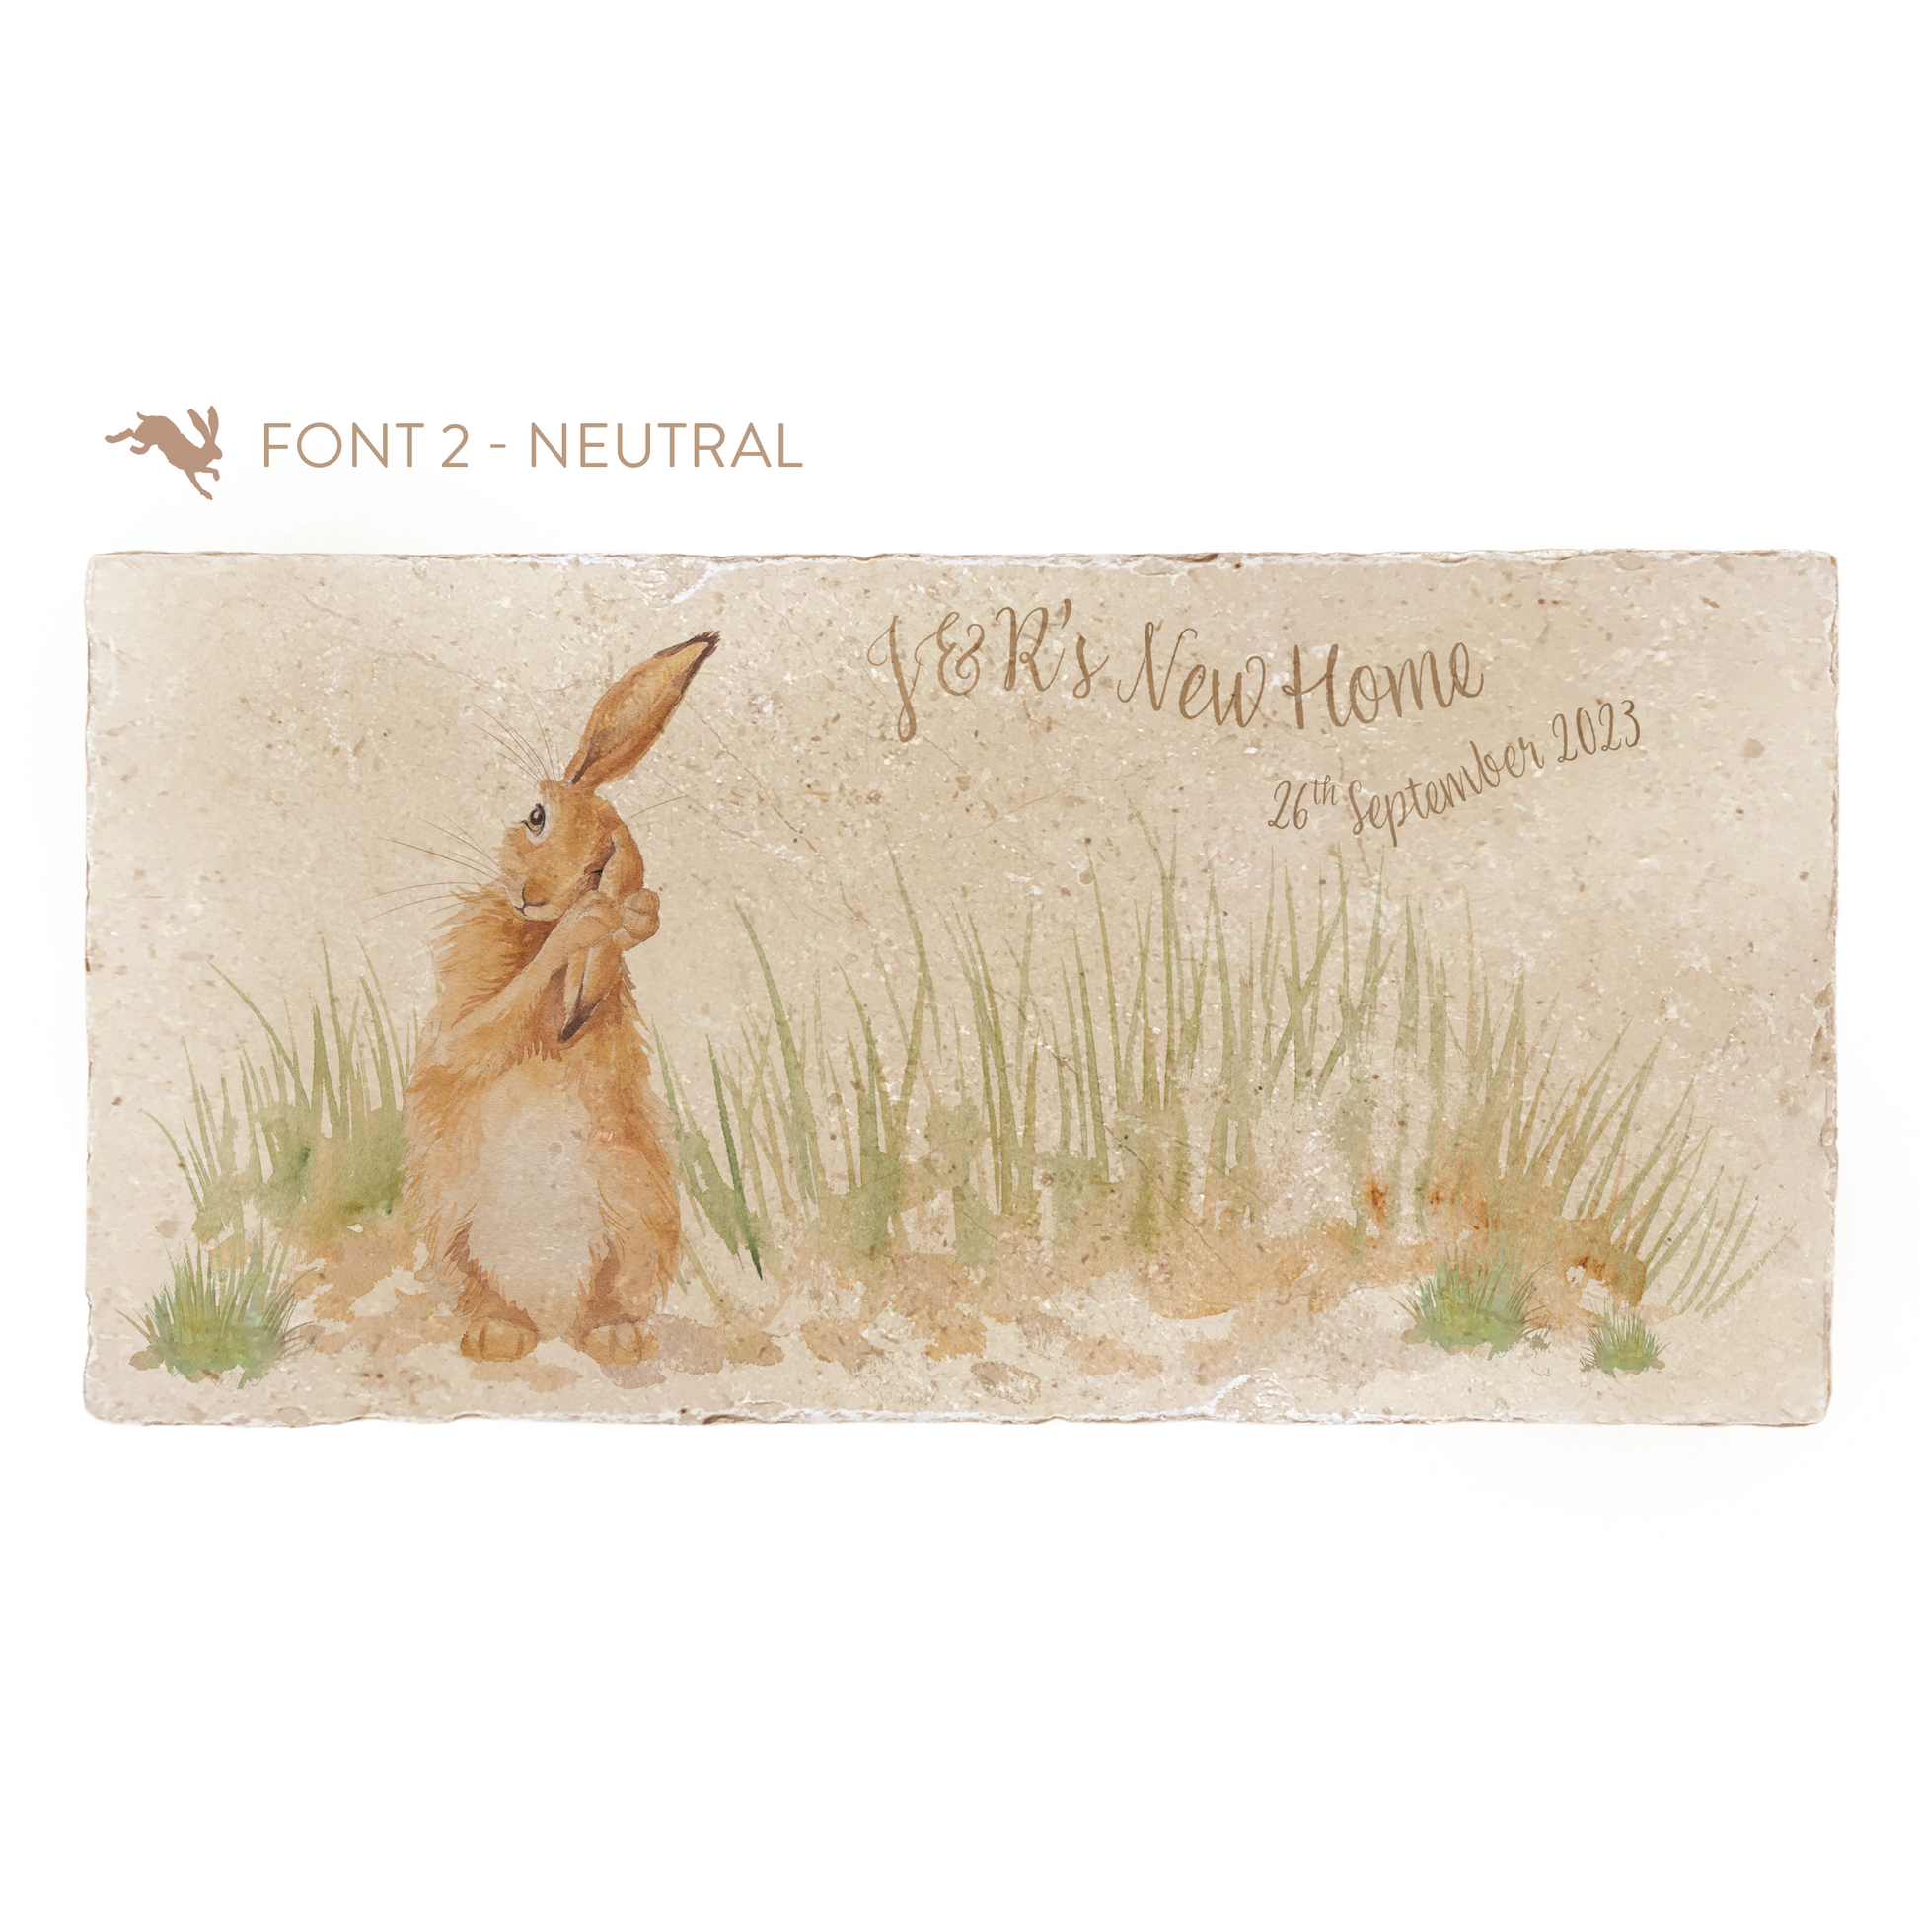 A personalised rectangular marble sharing platter featuring a hare washing his ear in a watercolour style. The example personalised neutral colour text reads ‘J&R’s New Home, 26th September 2023’ in an elegant script font.